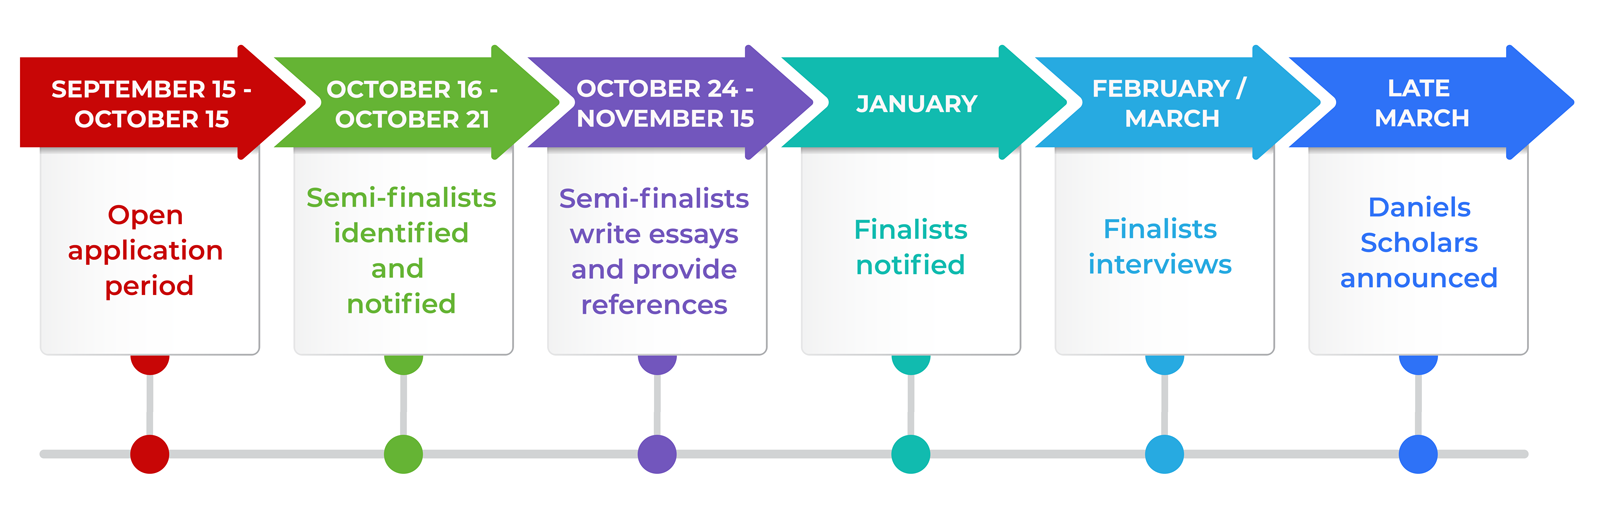 Oct-Early December: Application period open, Jan: Finalists announced, Feb-early Mar: Finalists interviewed, Late March: Daniels Scholars announced